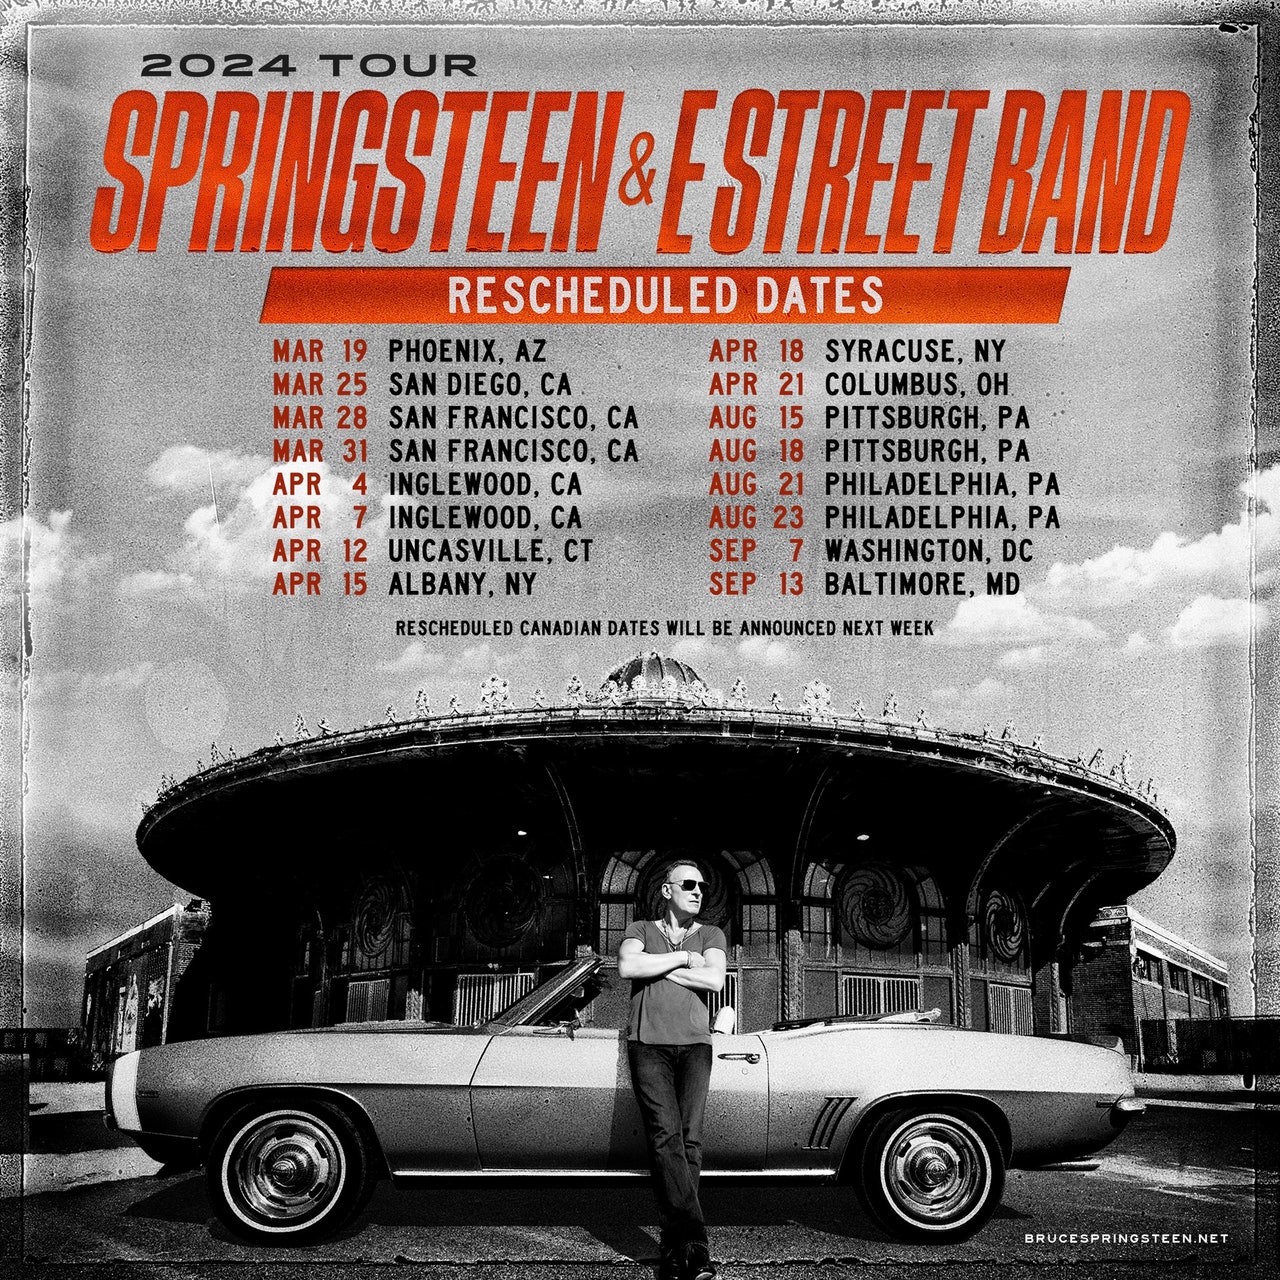 Bruce Springsteen & The E Street Band 2024 Tour